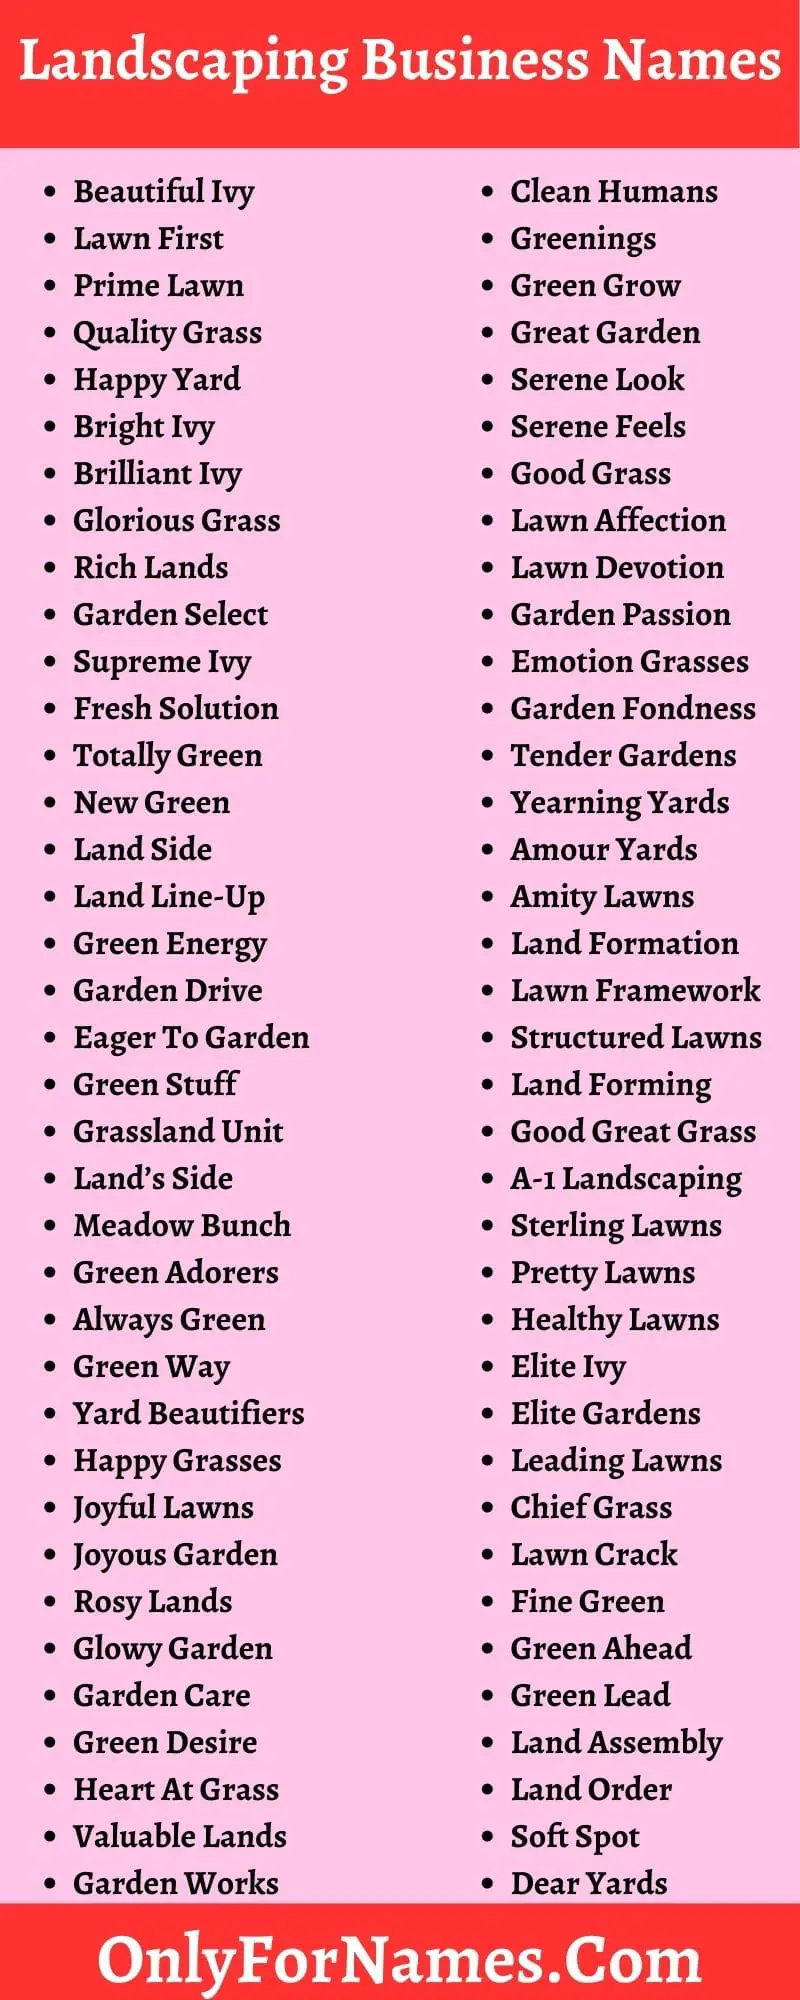 Landscaping Business Names